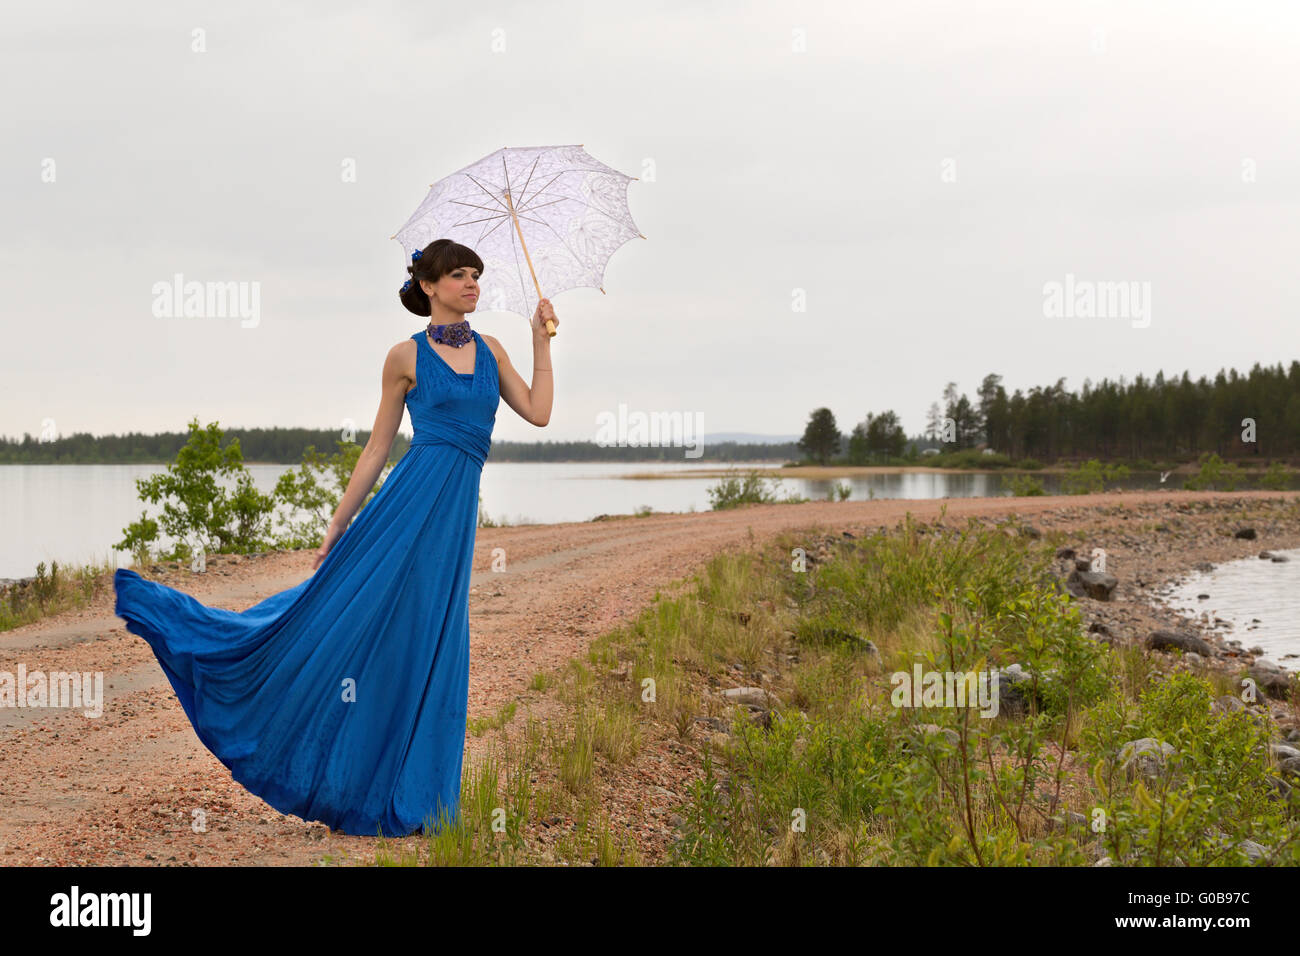 A girl tries to keep a umbrella which pulls out a wind. Stock Photo